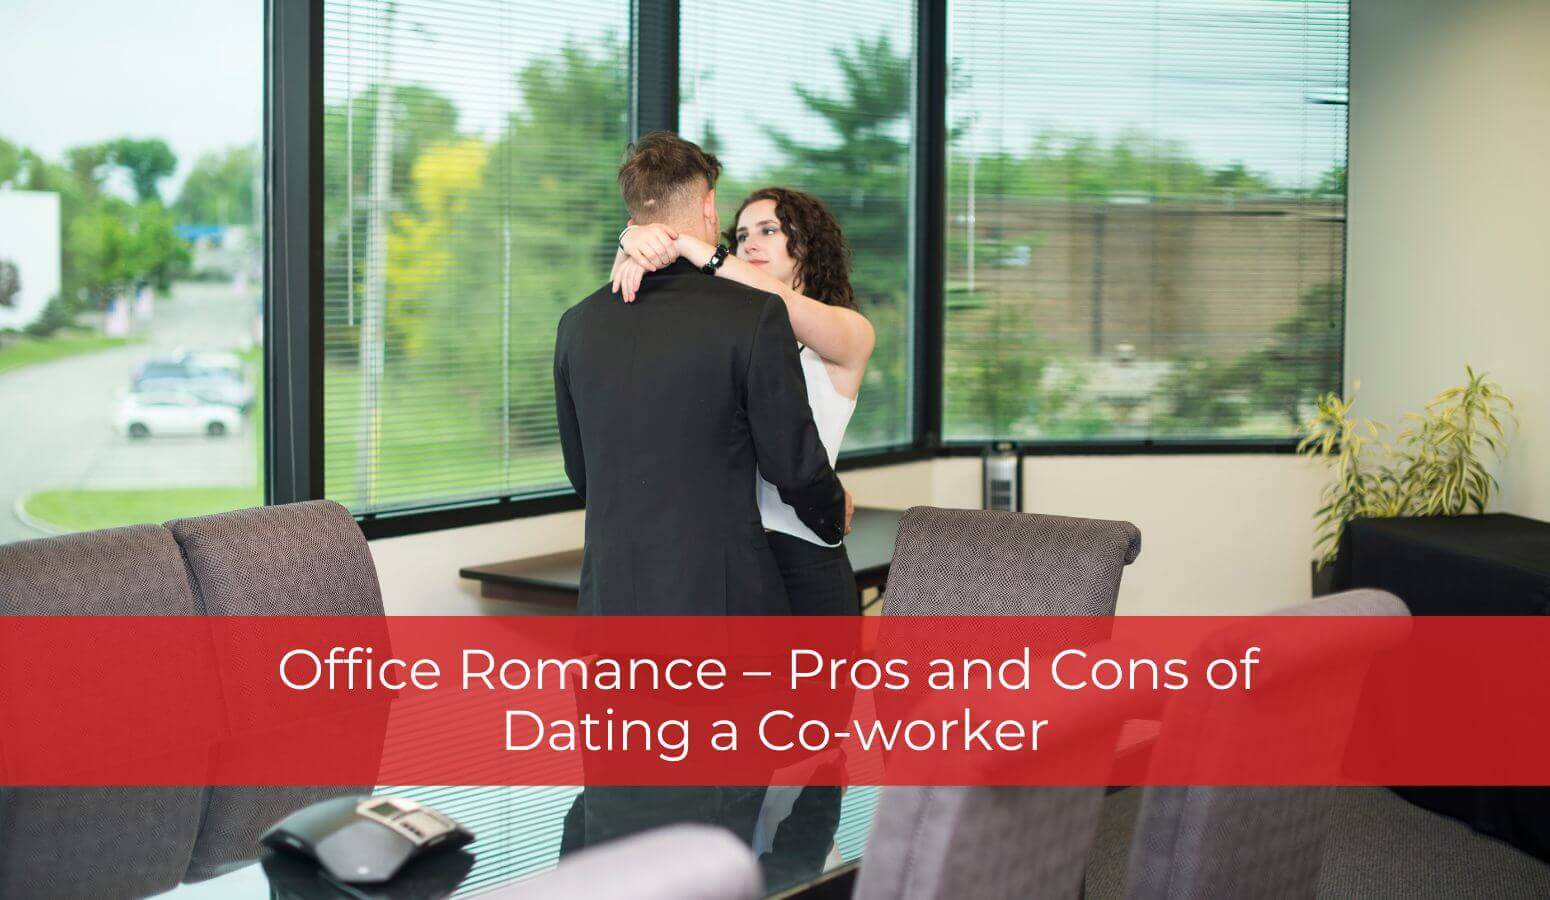 Featured image for “Office Romance – Pros and Cons of Dating a Co-worker”